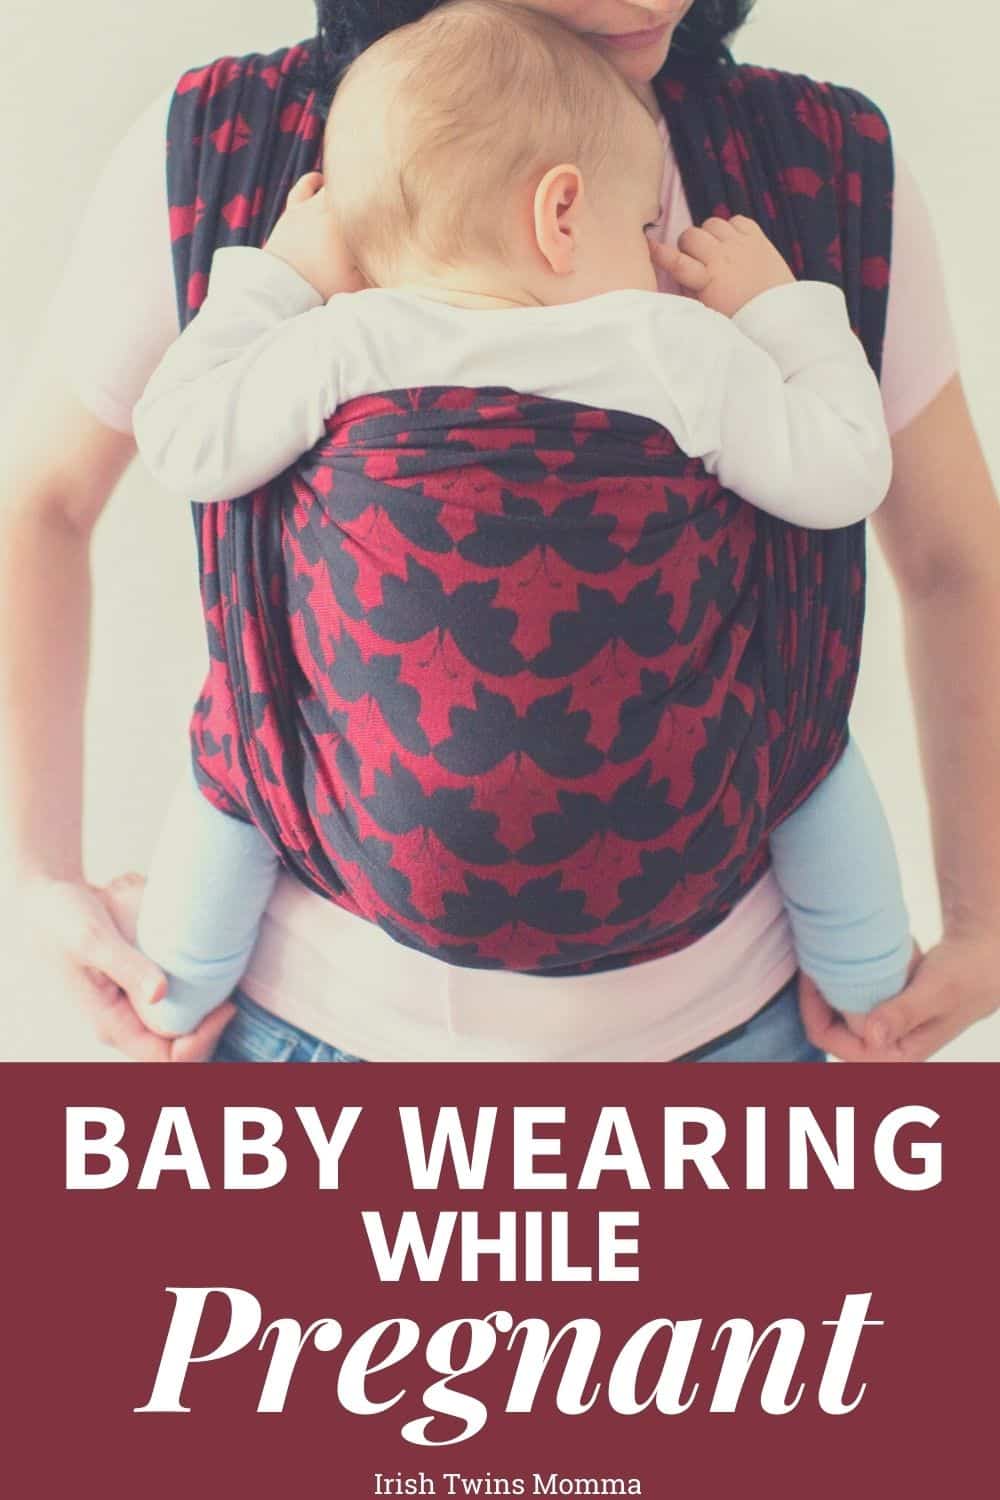 Baby Wearing while Pregnant